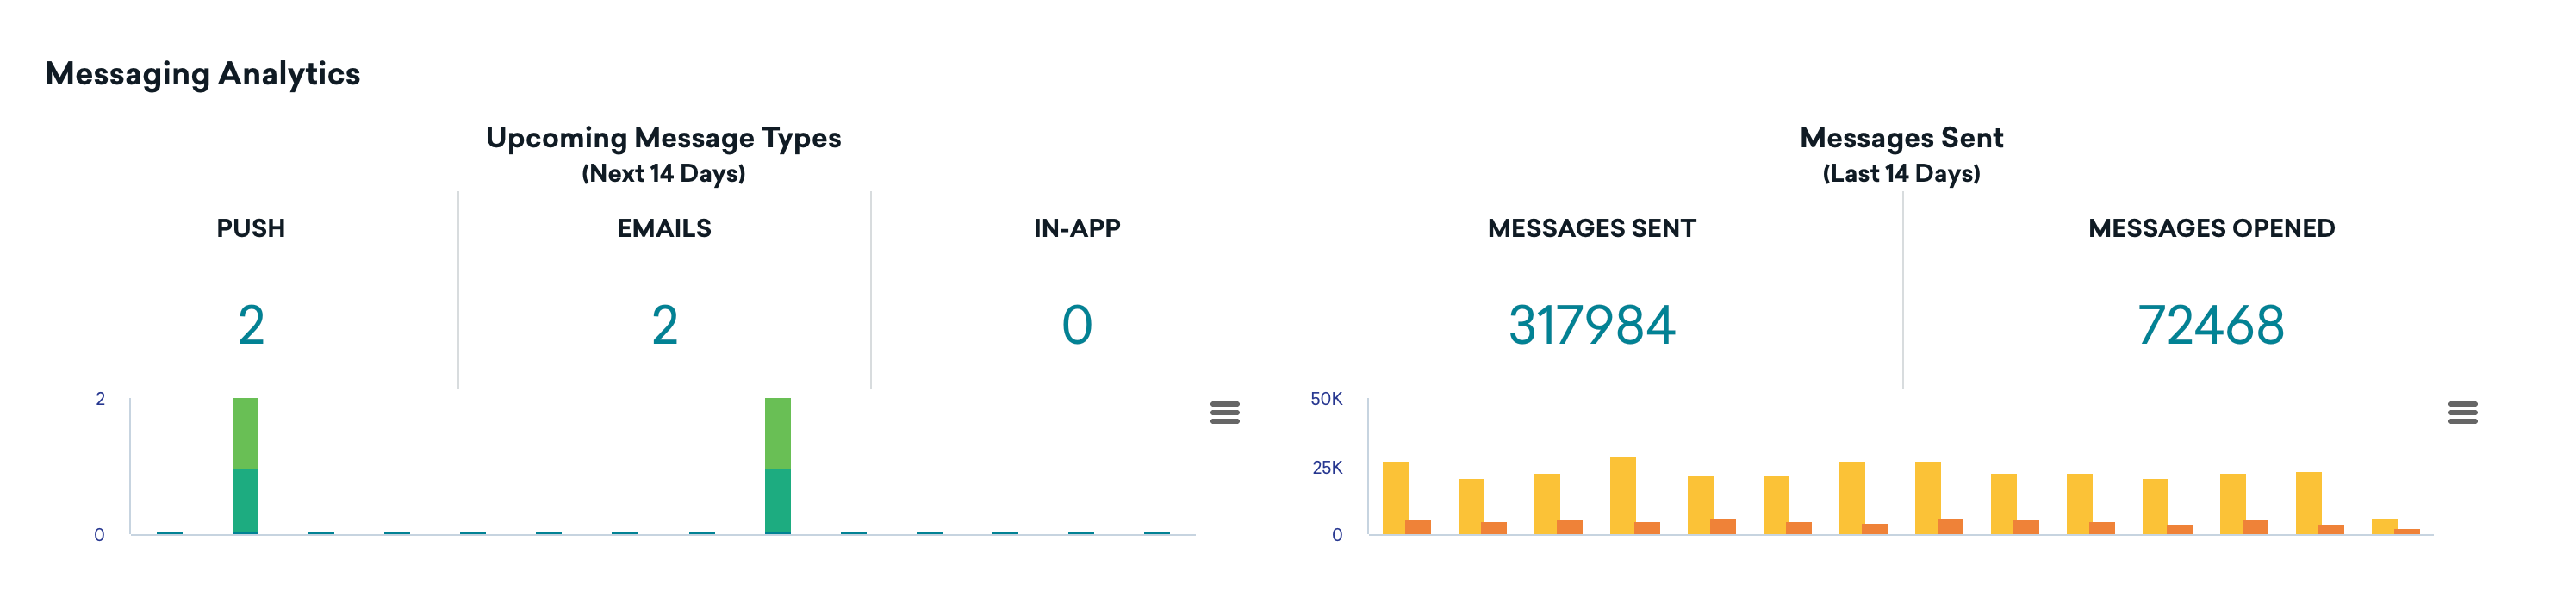 The 'Upcoming Message Types' and 'Messages Sent' graphs within Messaging Analytics.